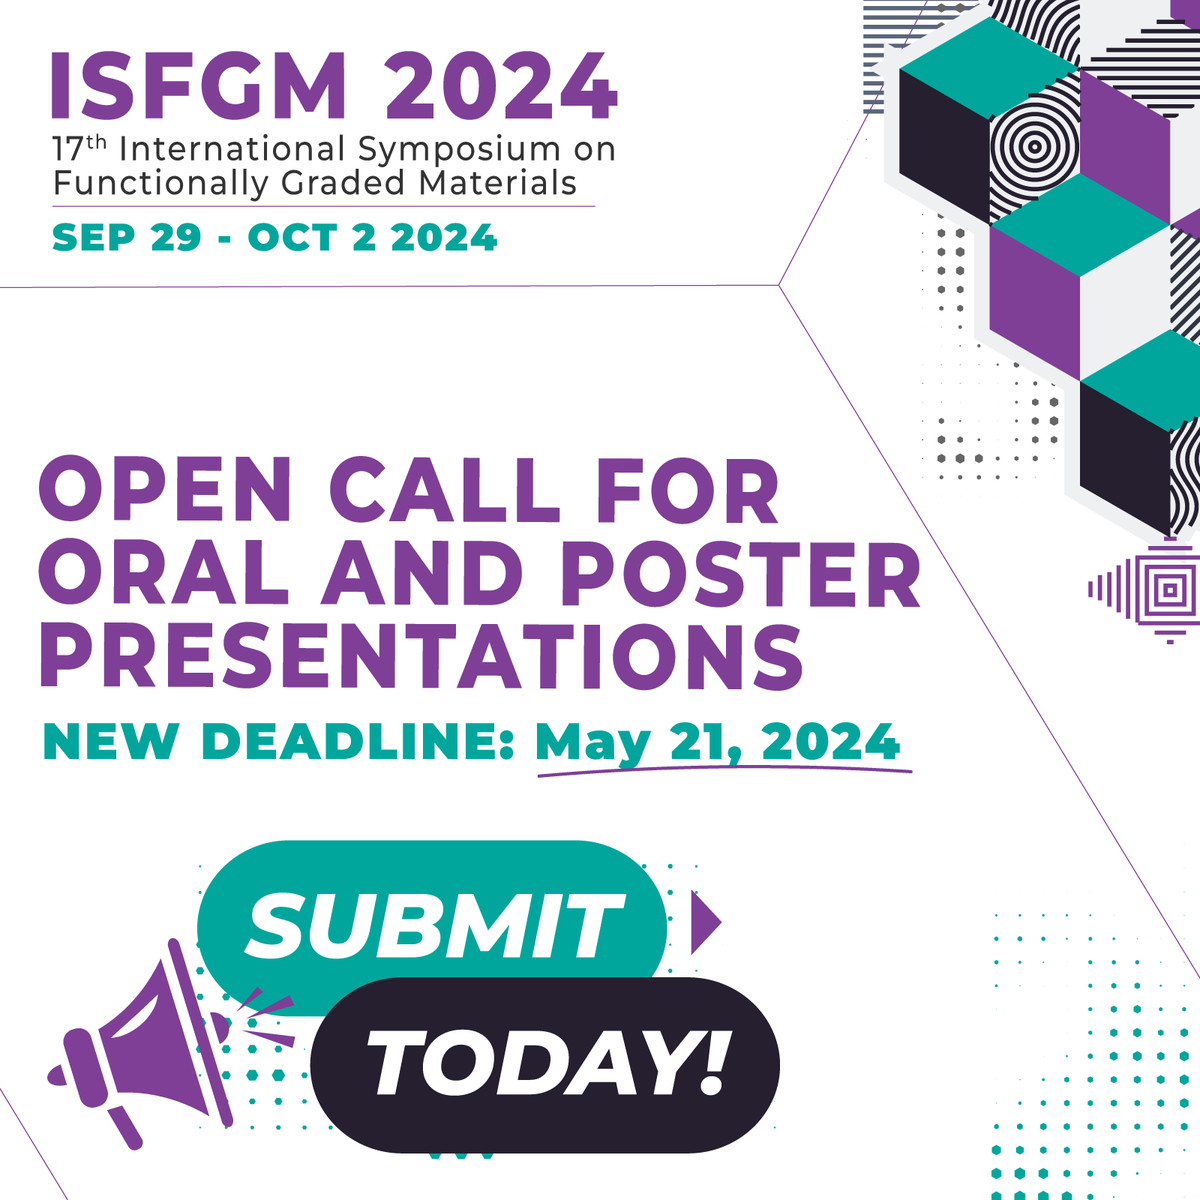 🏆 Calling all grad students & researchers! Join us at #ISFGM2024 for a chance to showcase your groundbreaking work! 🏅Snag one of the awards: 🌟 3 Awards for Best #OralPresentations 🌟 3 Awards for Best #Posters 🔗 events.inl.int/isfgm2024 #inlnano #abstracts #conference